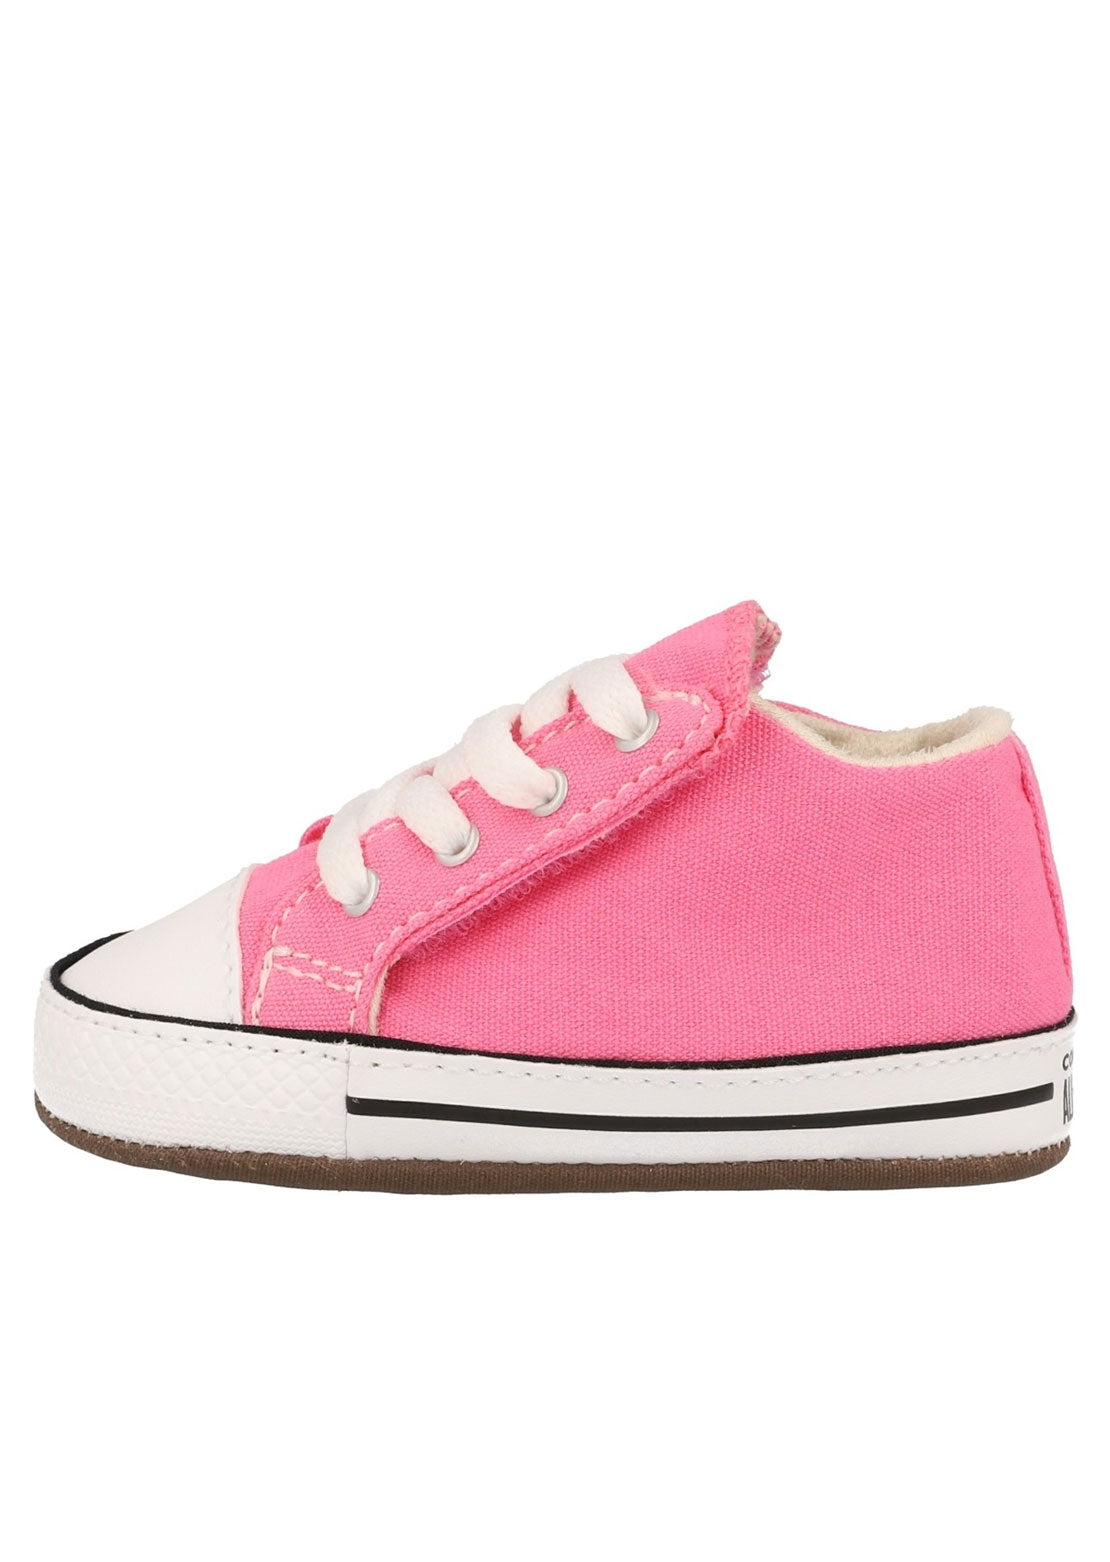 Converse Junior Infant Chuck Taylor All Star Cribster Canvas Shoes Pink/Natural Ivory/White